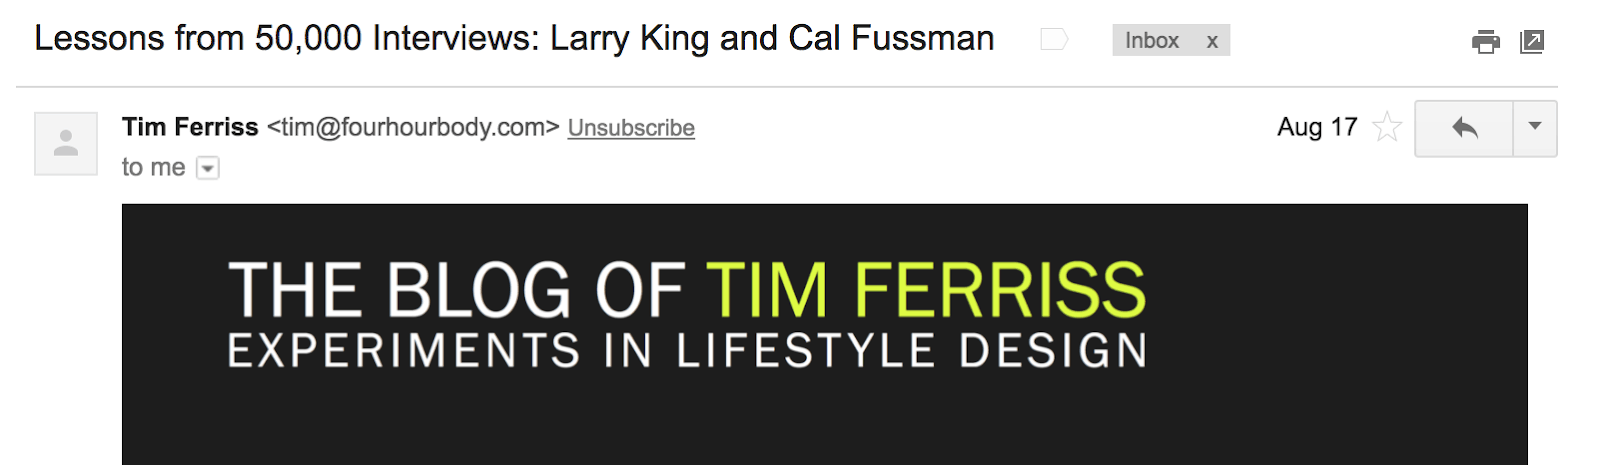 Best Email Subject Lines: Screenshot of email from Tim Ferriss